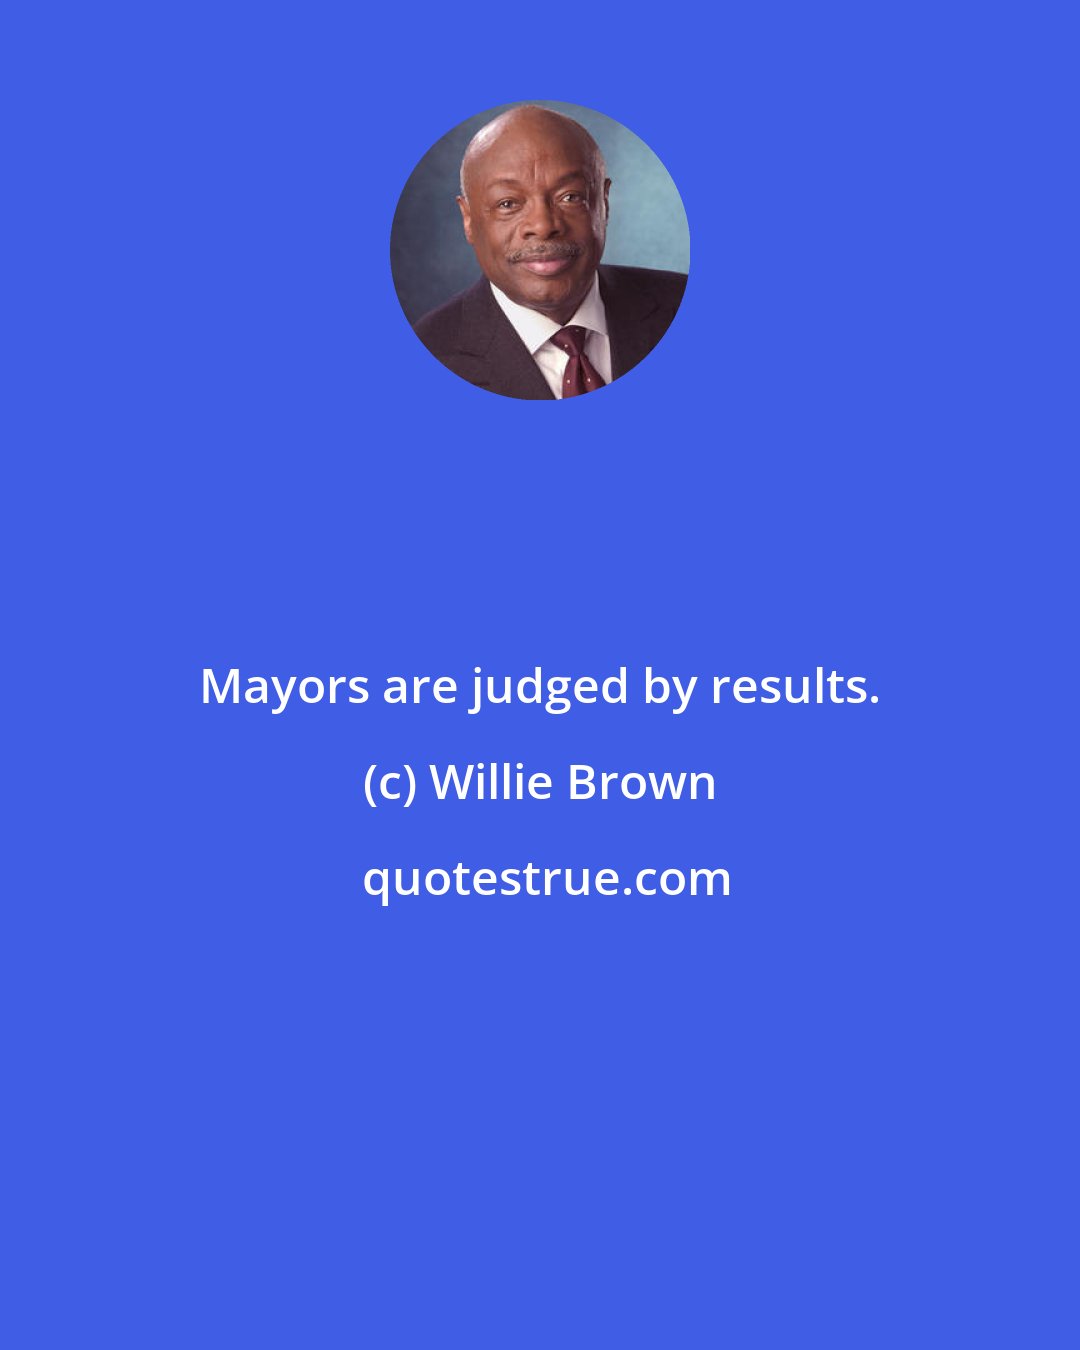 Willie Brown: Mayors are judged by results.